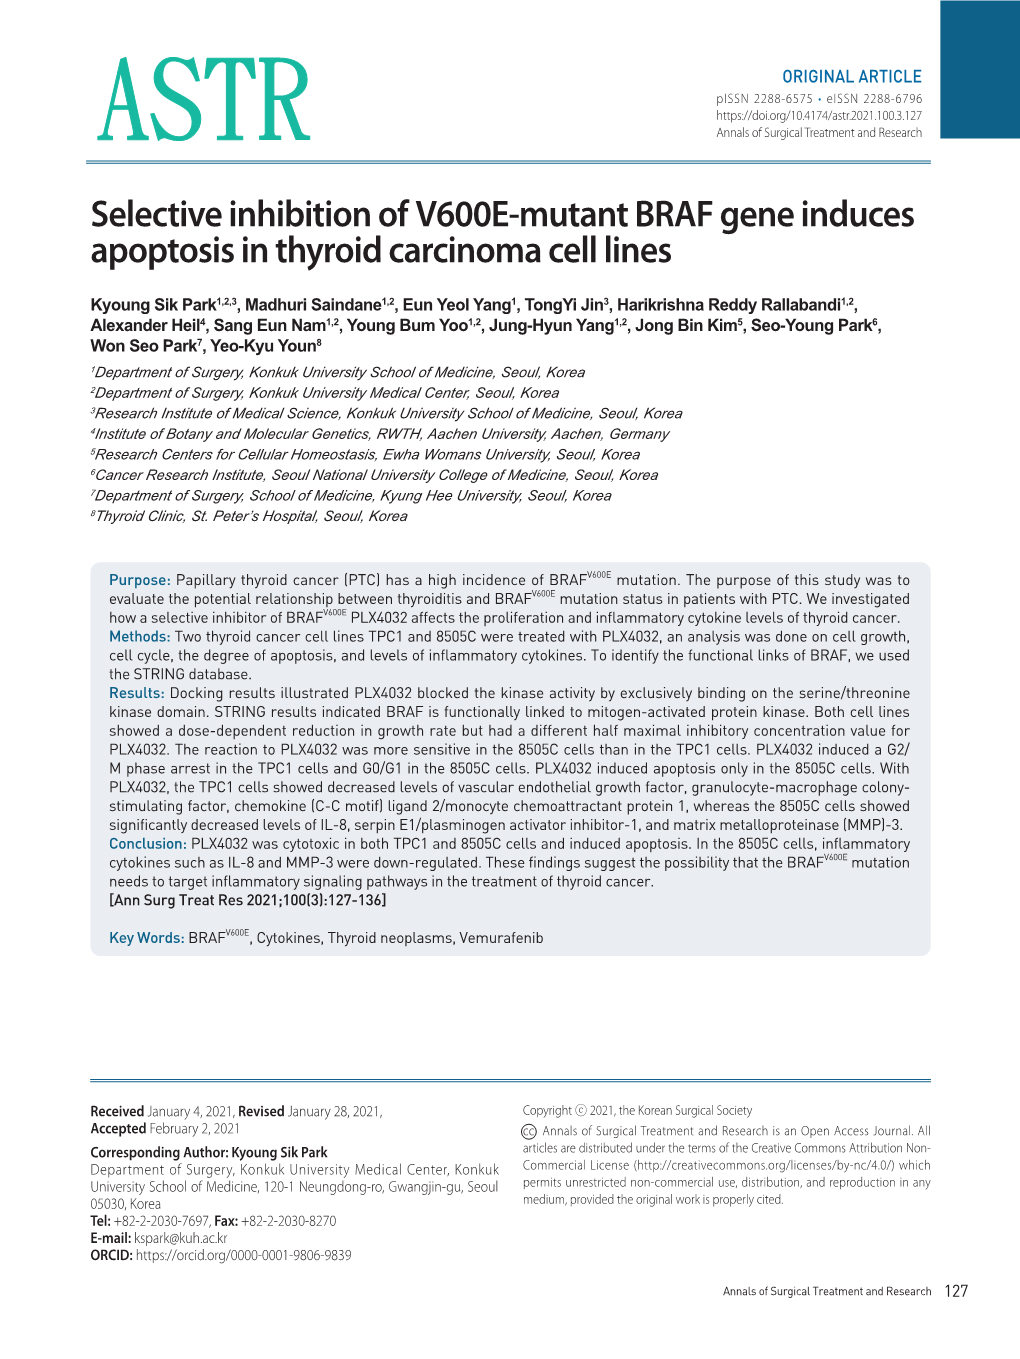 Selective Inhibition of V600E-Mutant BRAF Gene Induces Apoptosis in Thyroid Carcinoma Cell Lines